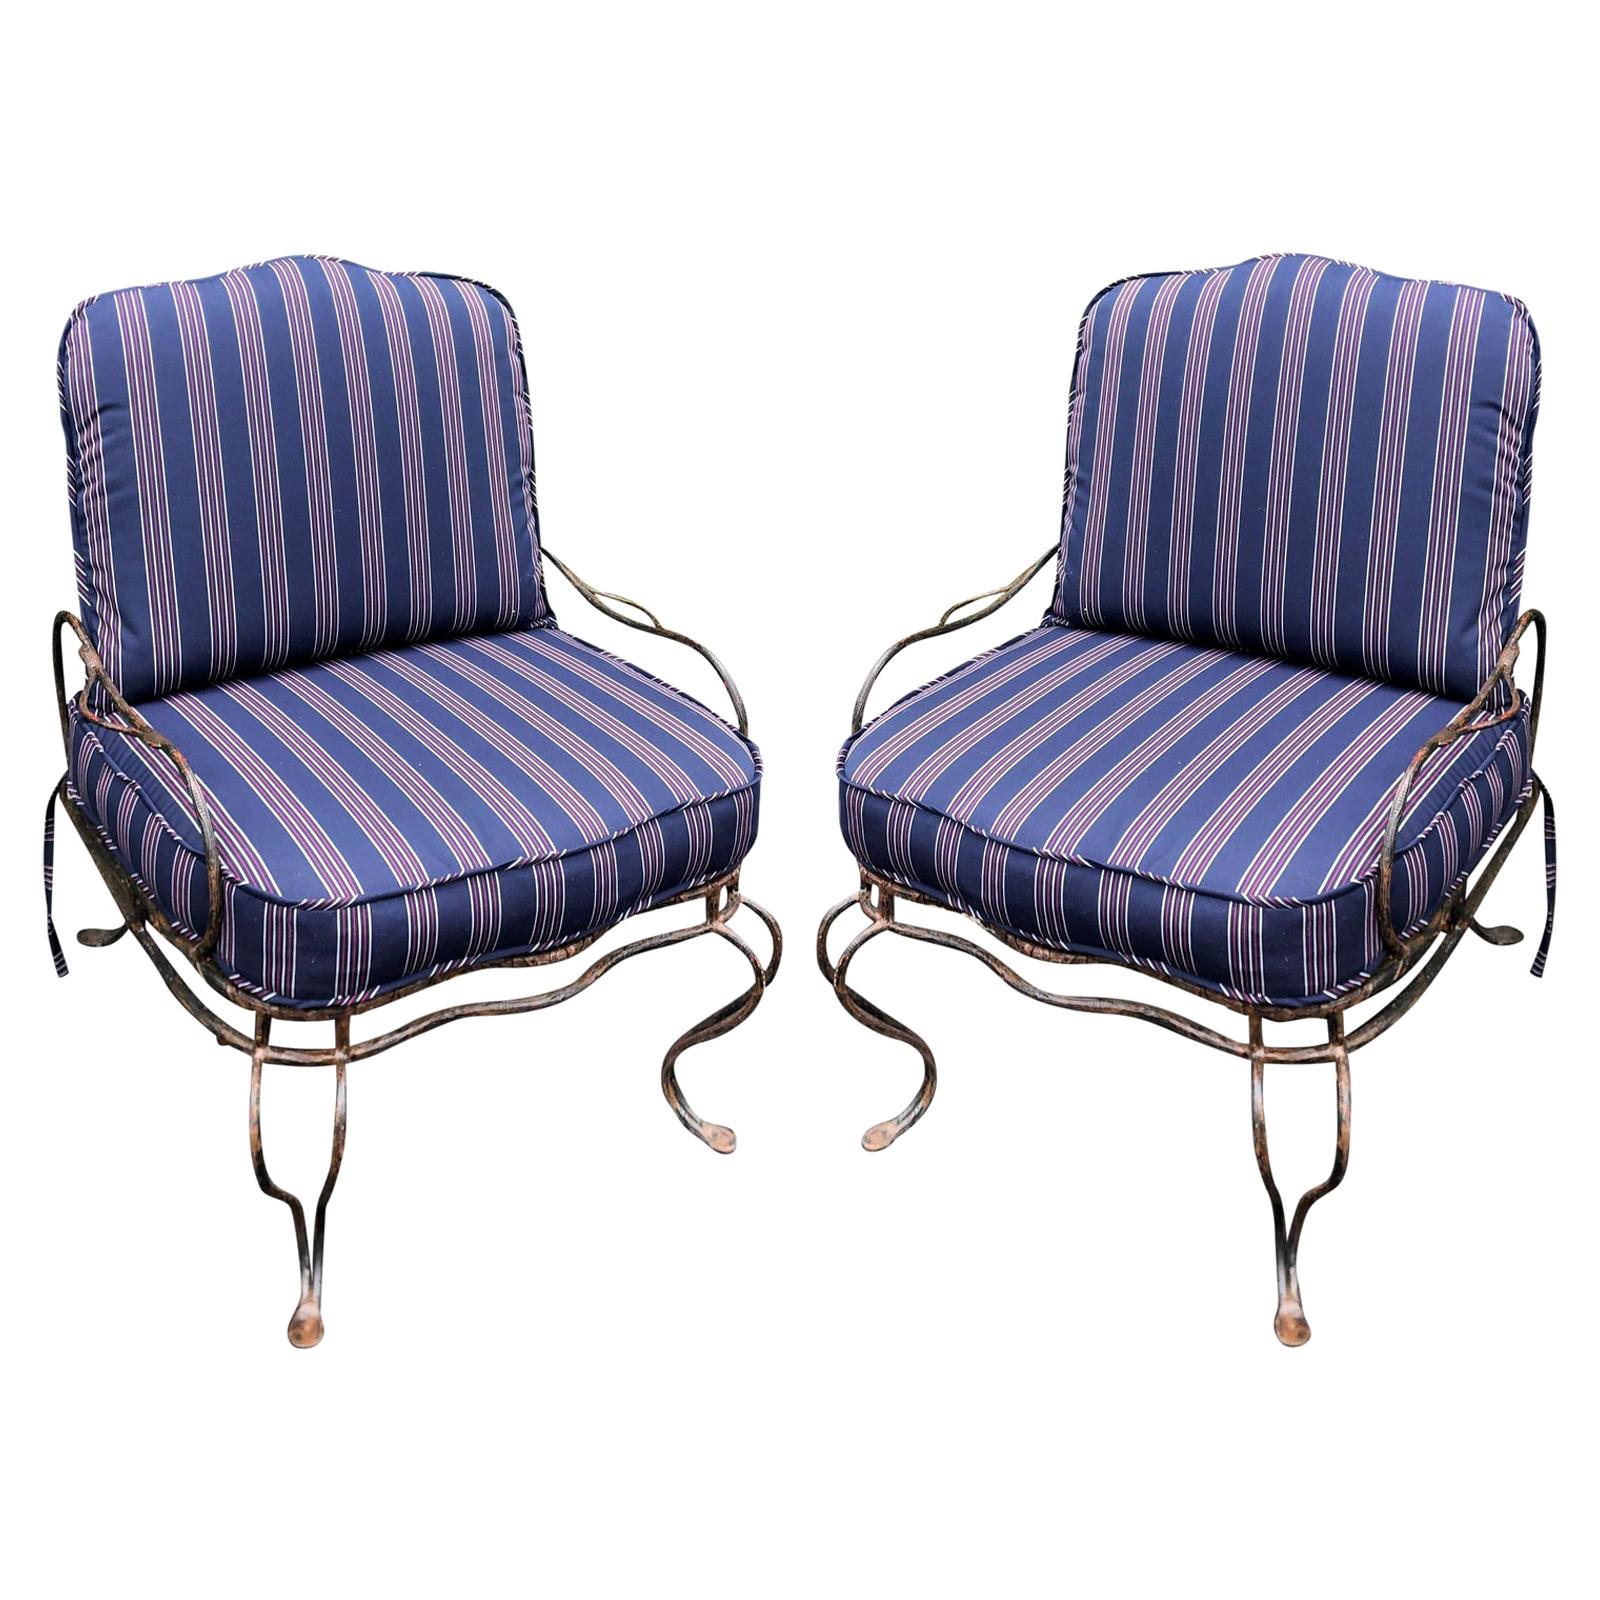 Rose Tarlow Wrought Iron Outdoor Lounge Chairs, a Pair